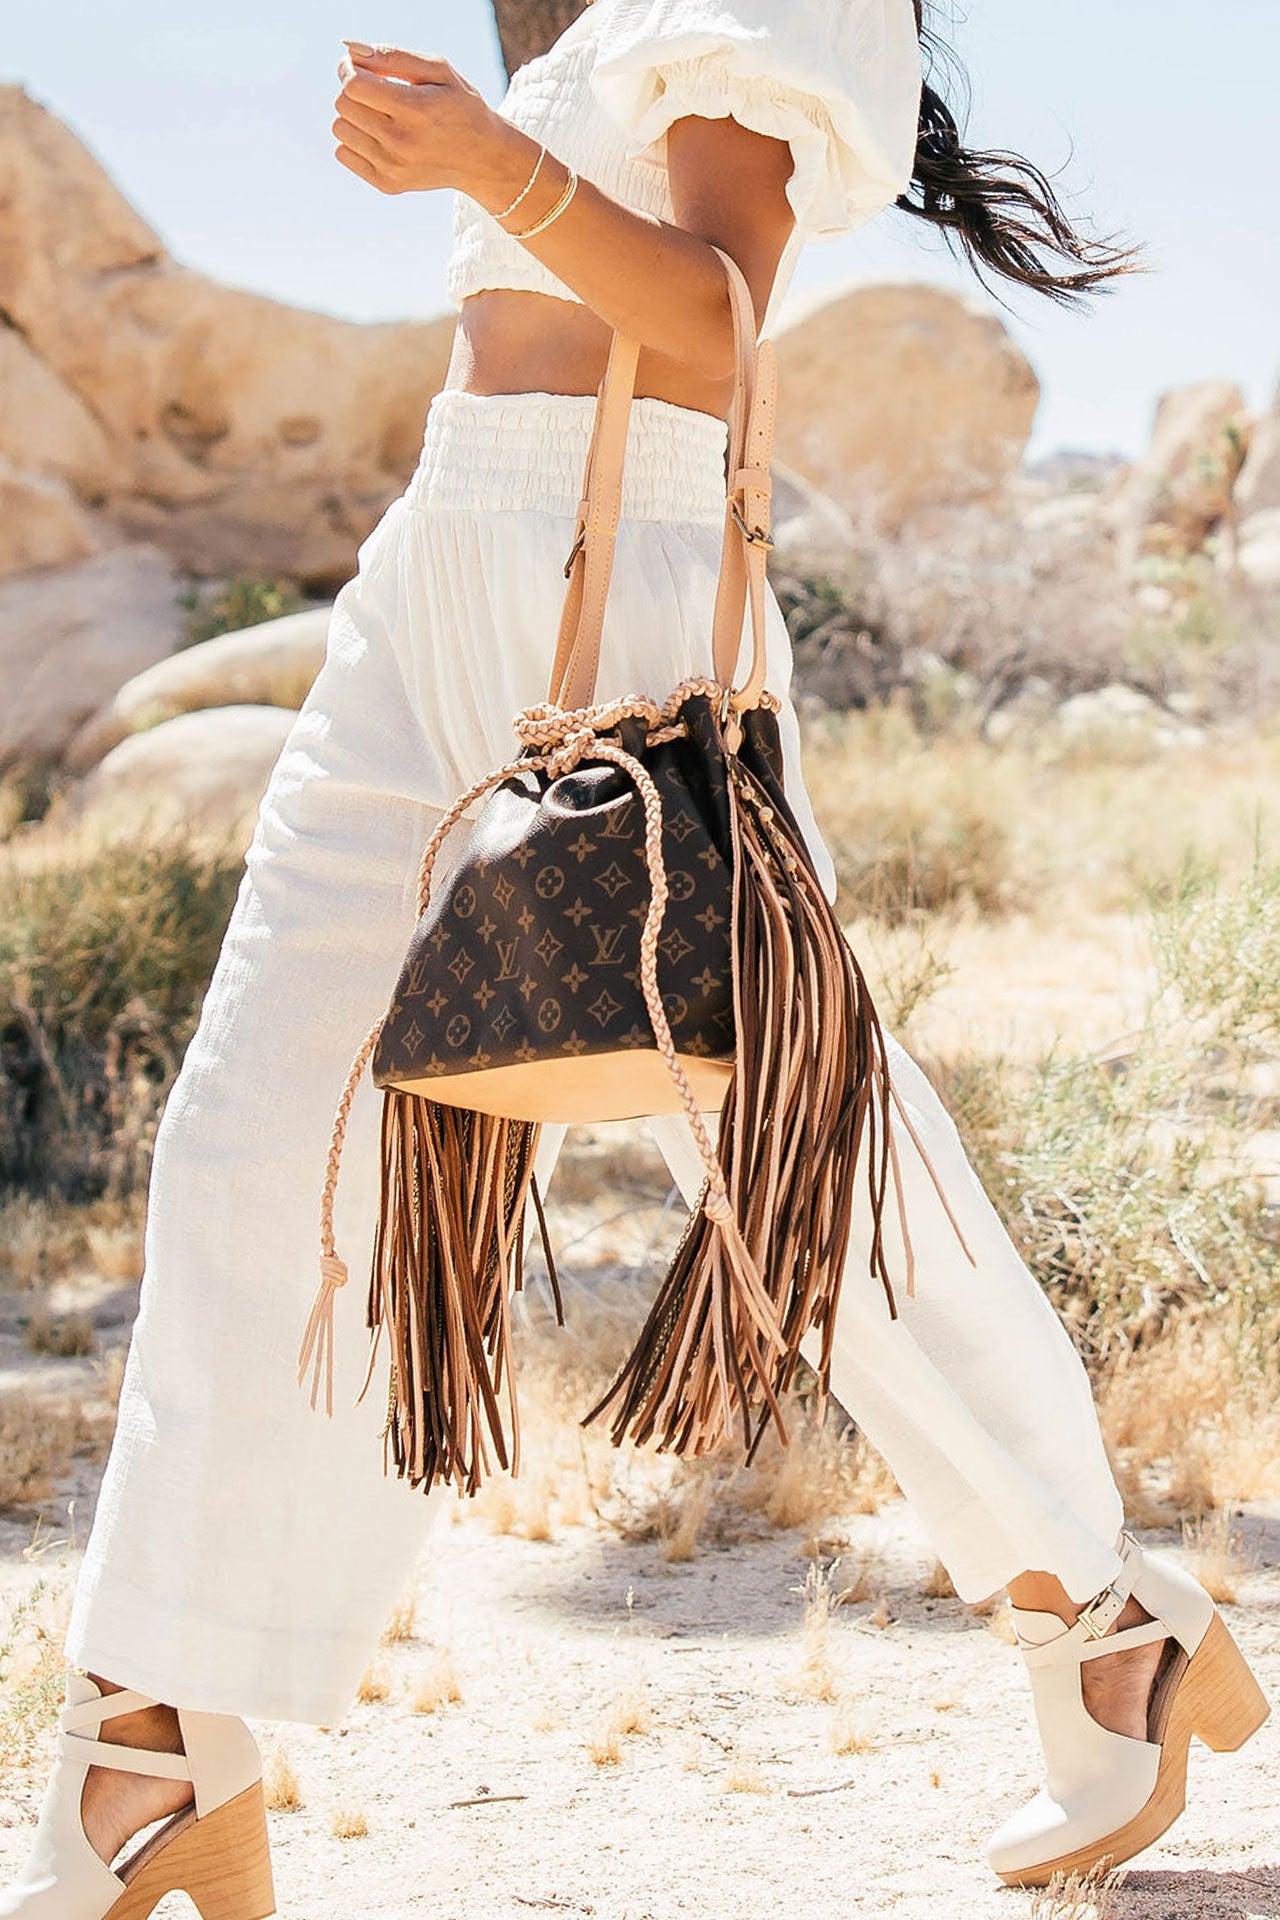 Collections – Vintage Boho Bags